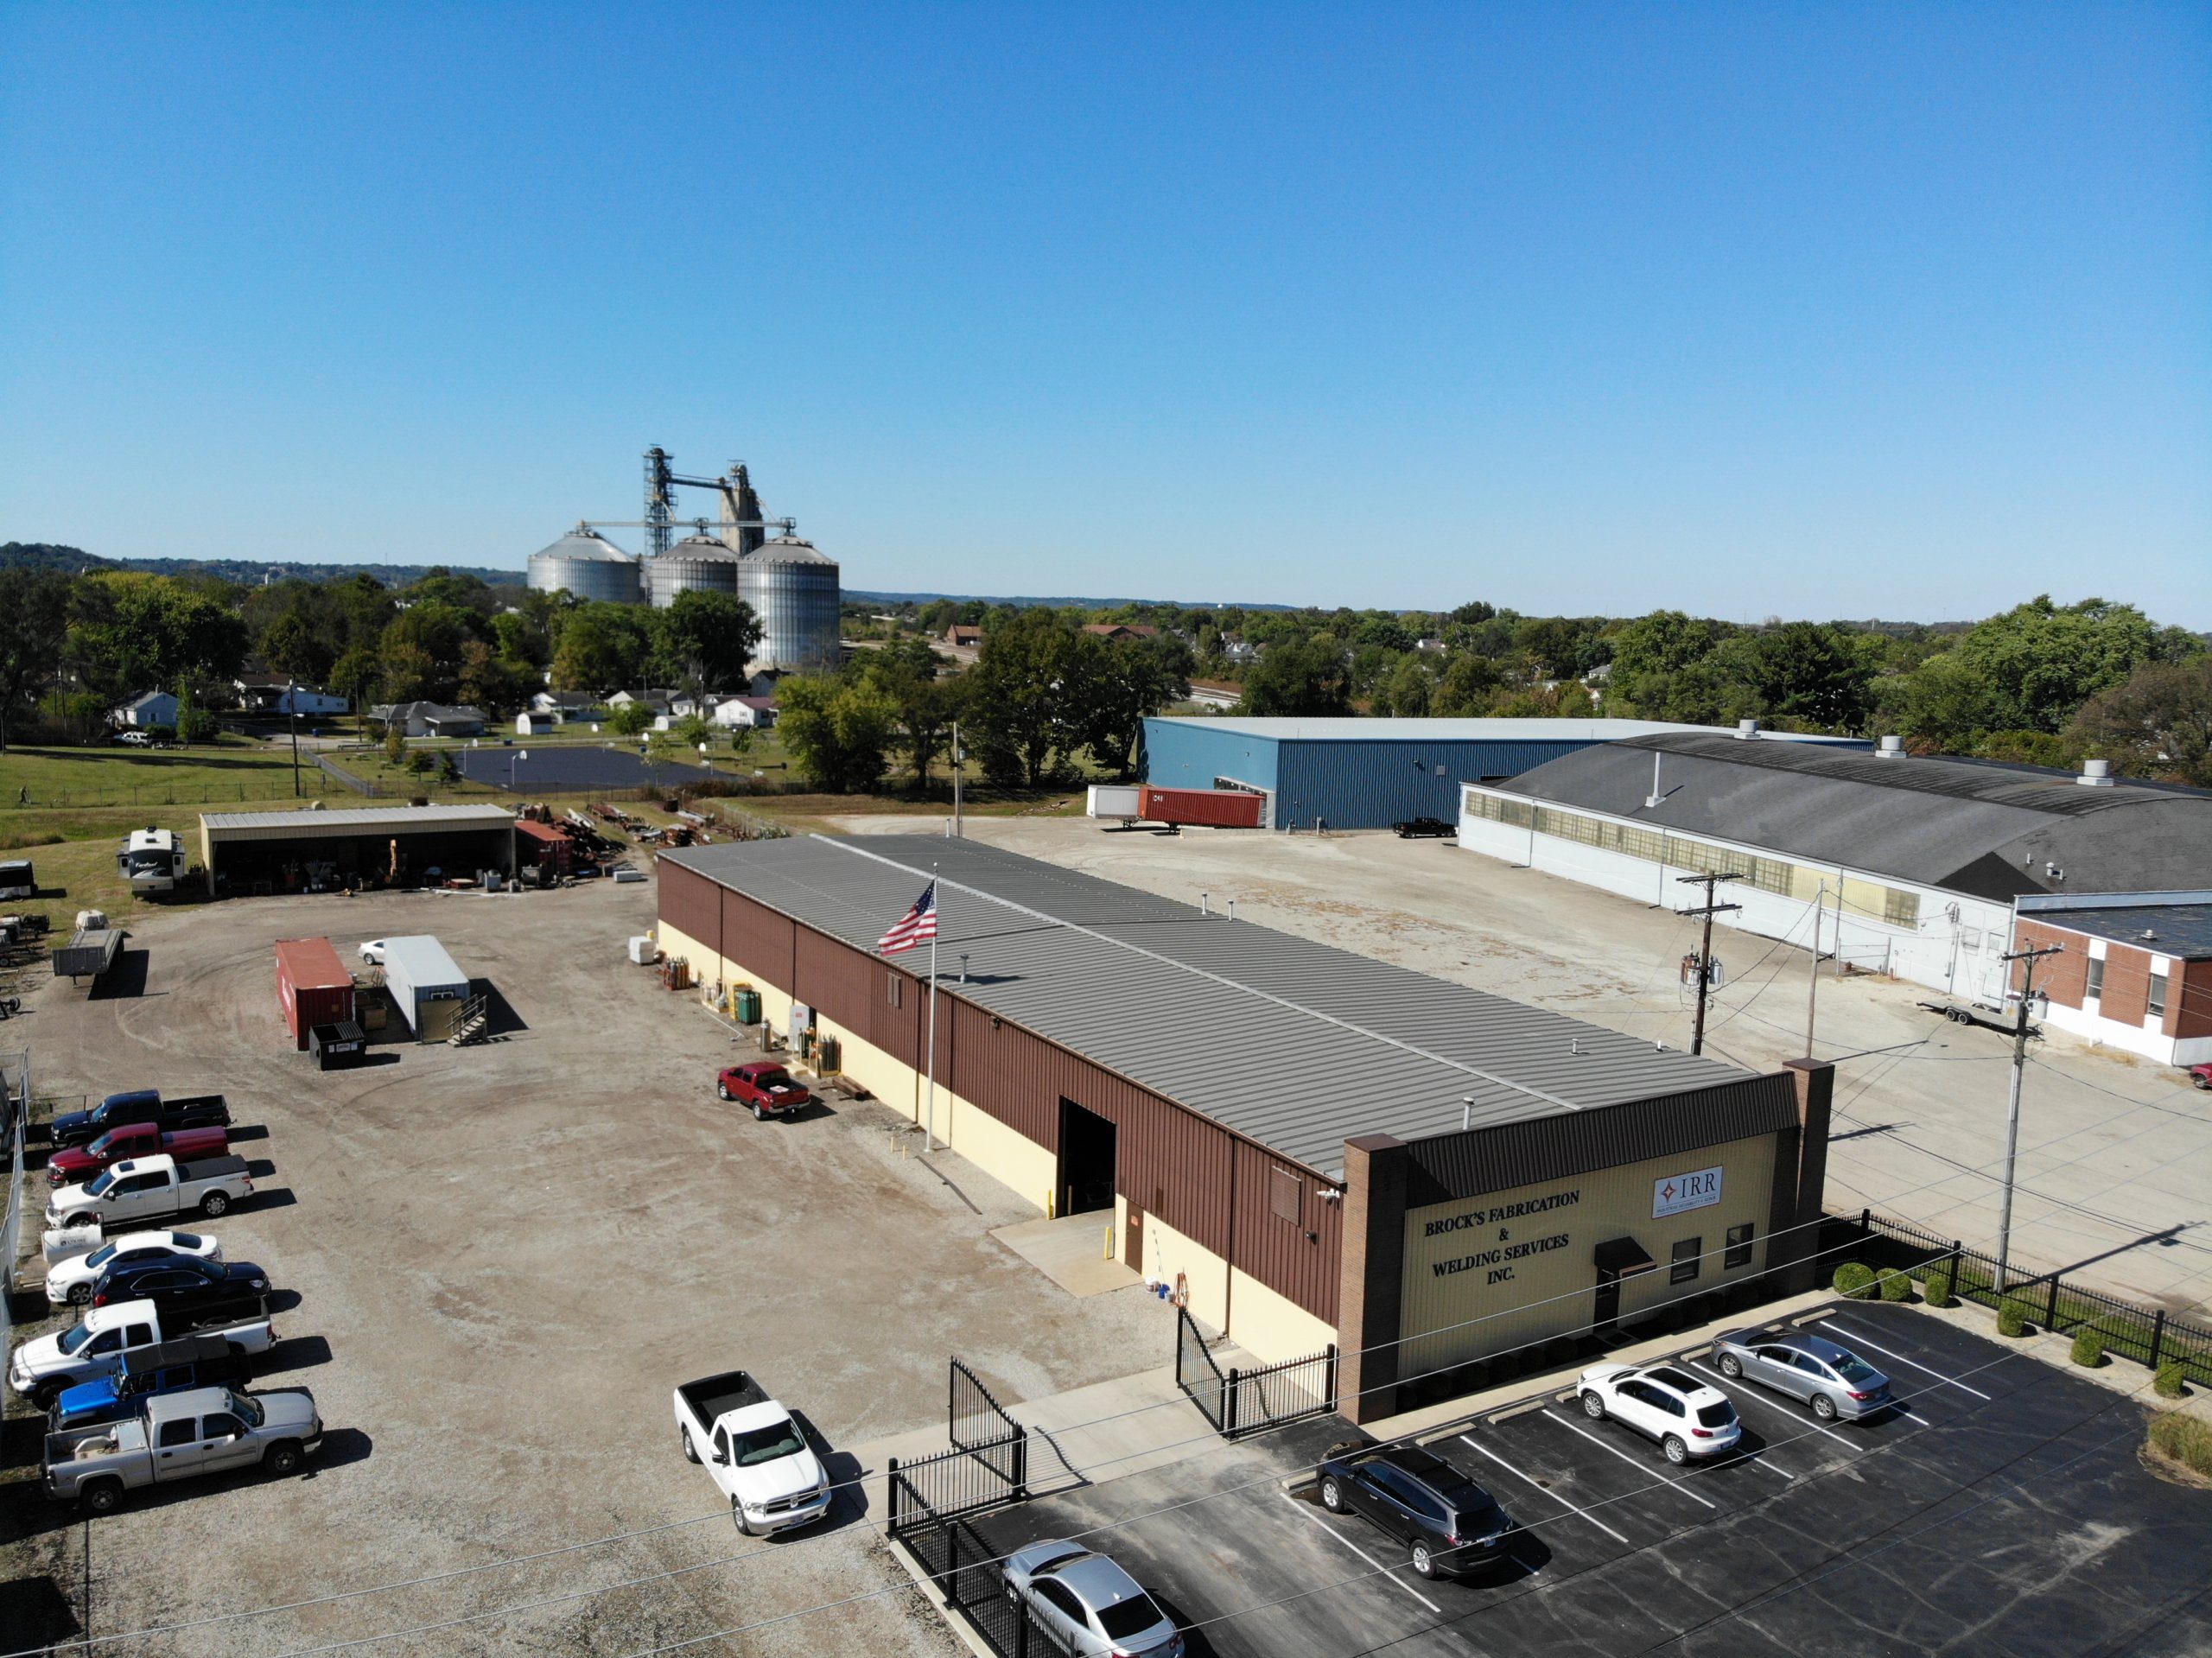 Industrial Reliability & Repair of Chillicothe to Expand, Add Four New, High-Wage Jobs